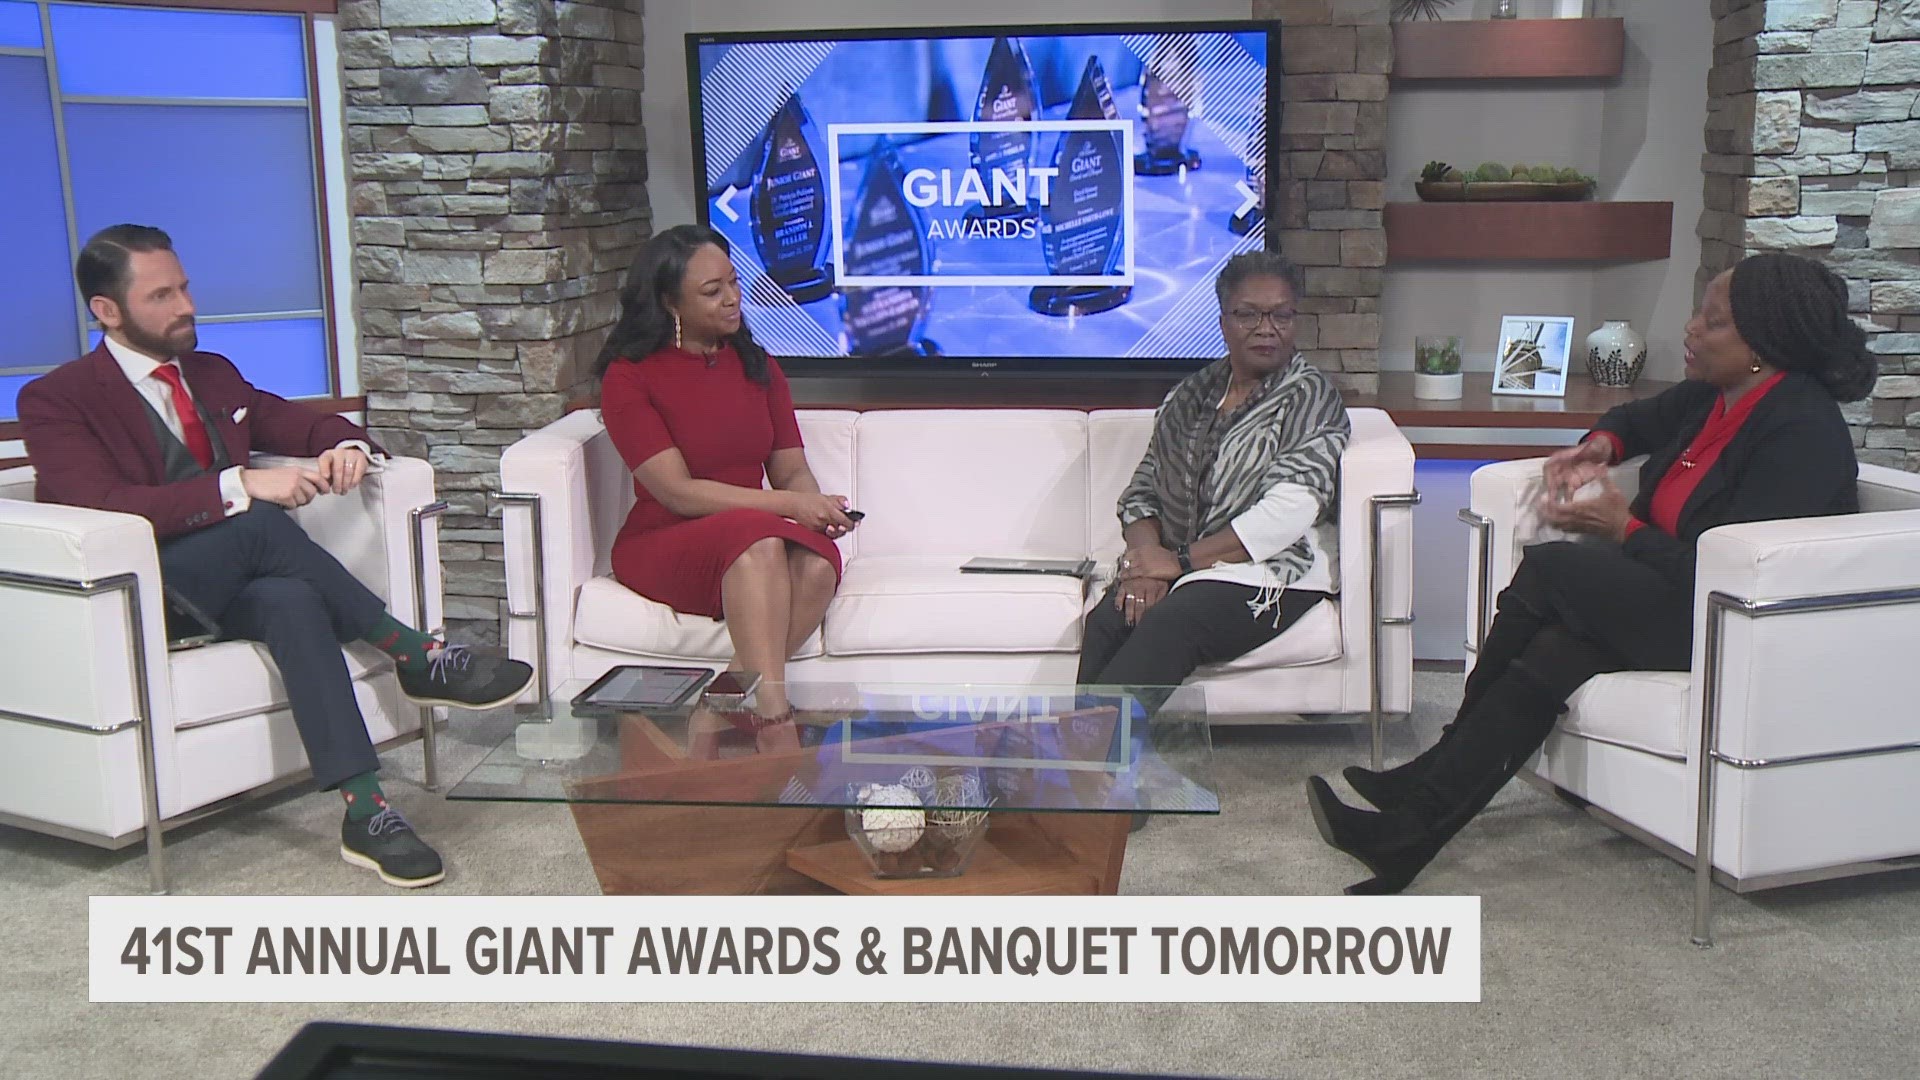 The GIANT Awards have been recognizing African American leaders in the West Michigan community for more than four decades.